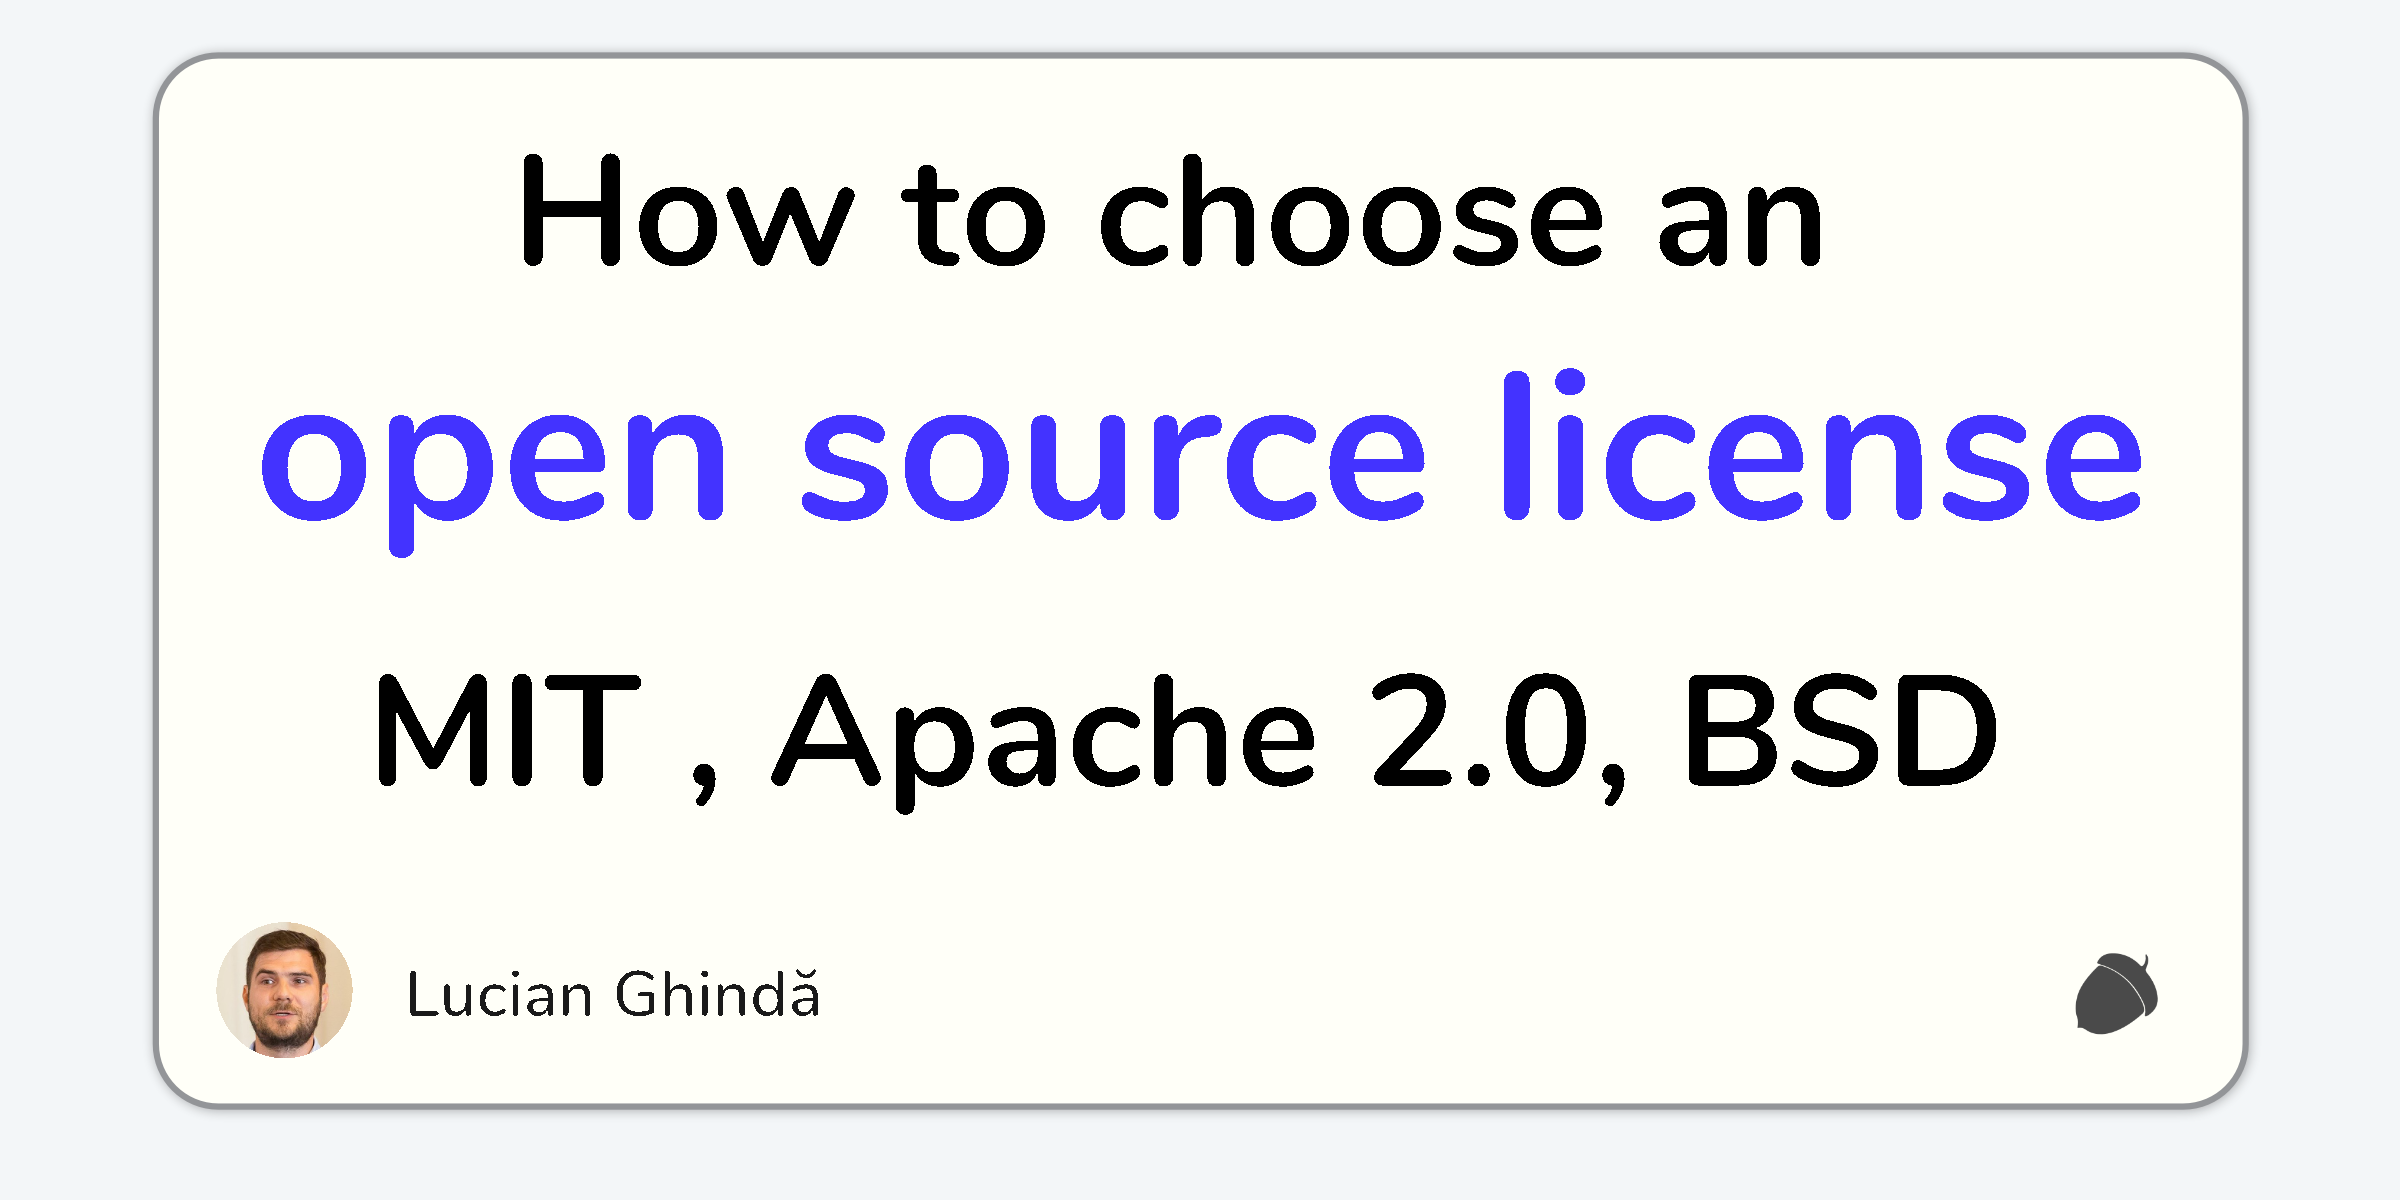 open-source-licenses-guide.png